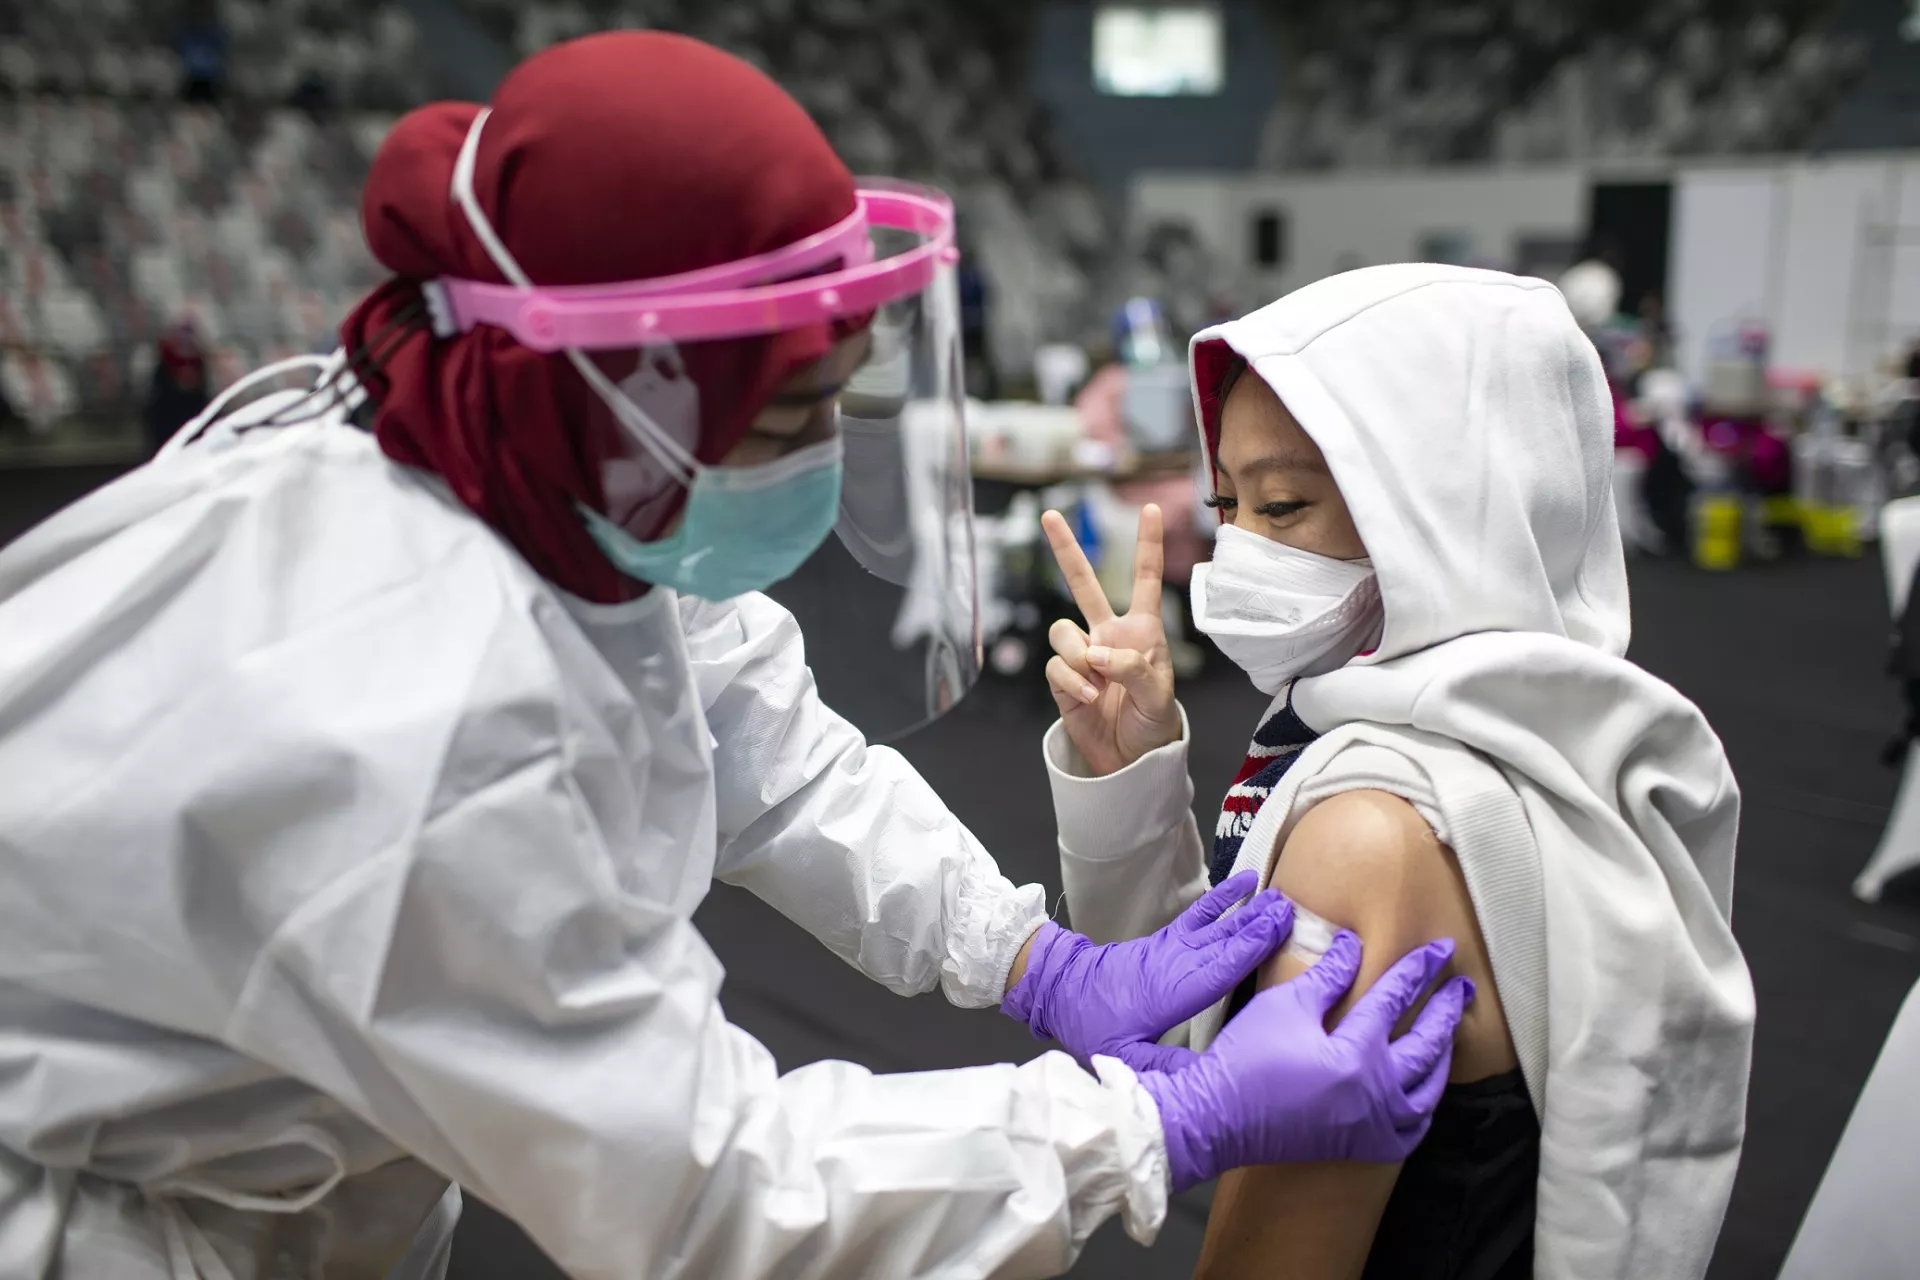 Indonesia. A health worker receives the COVID-19 vaccine at a mass vaccination site.